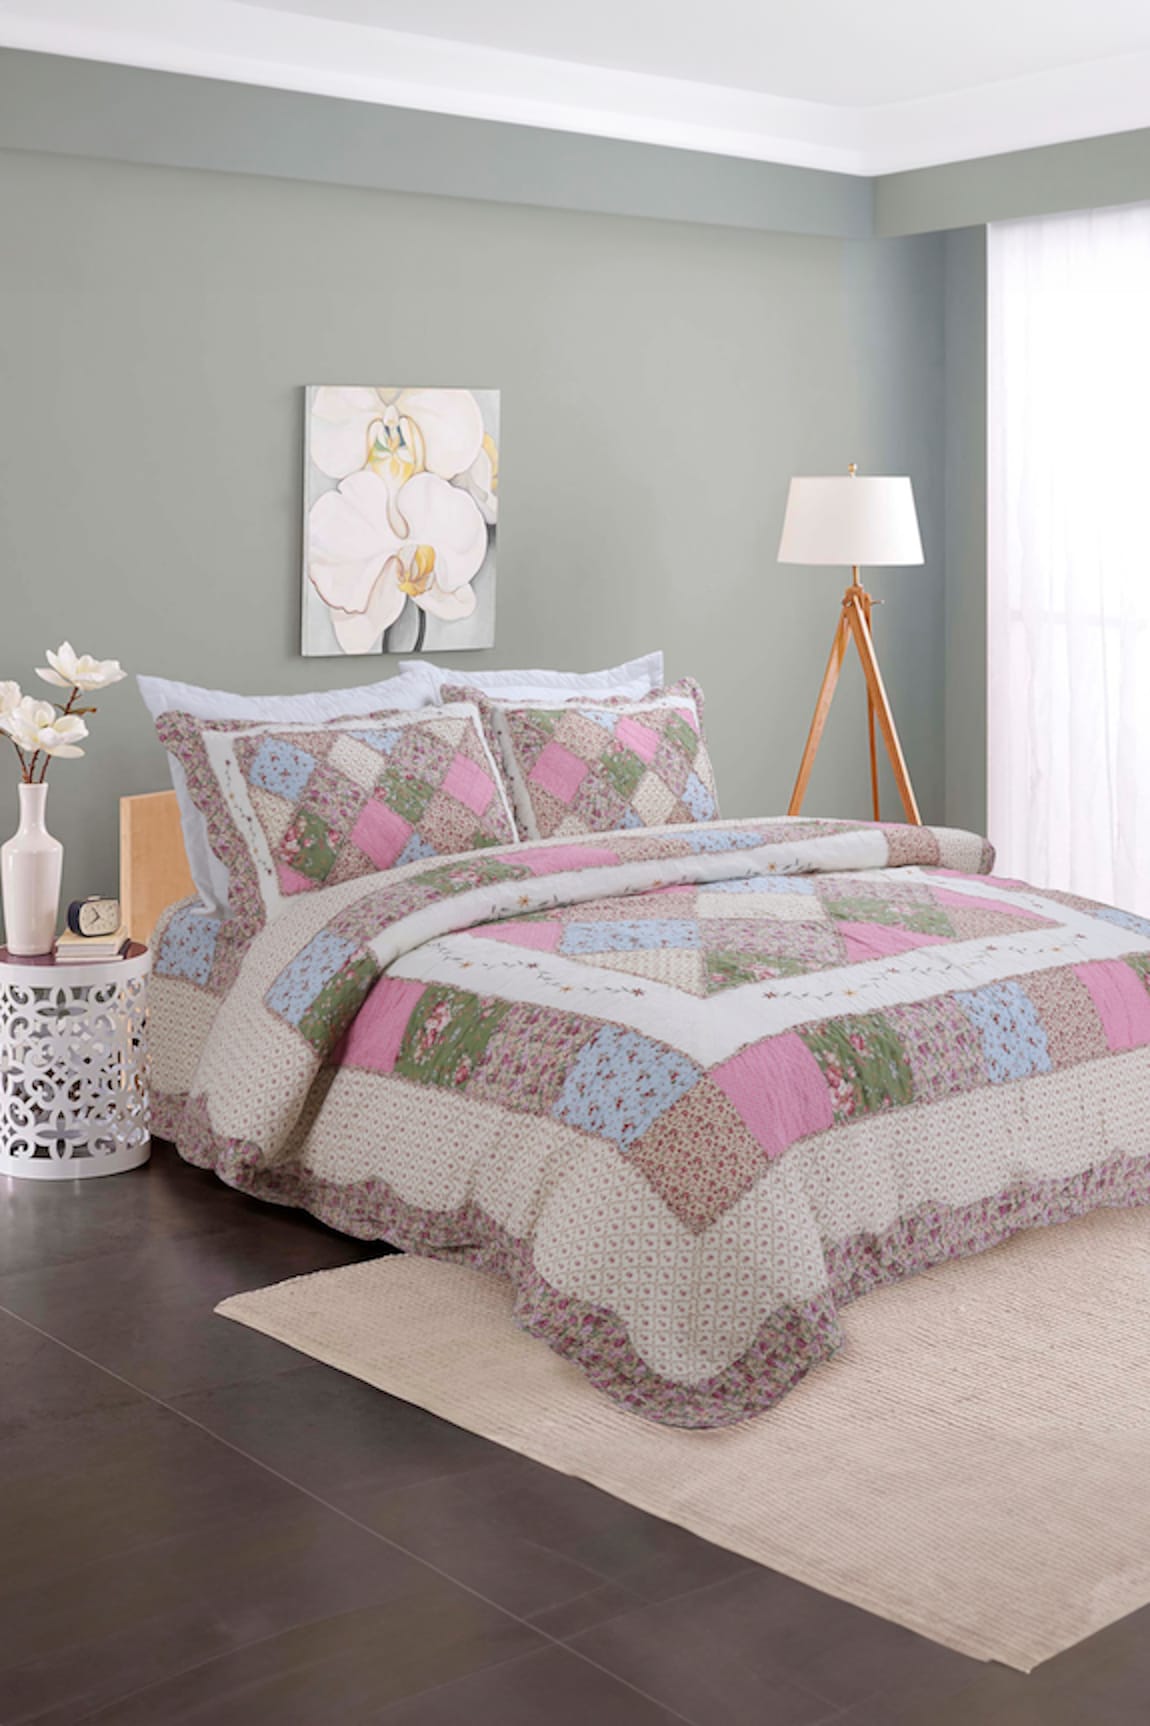 Quliting Tree Geometric Print Quilt With Pillow Covers